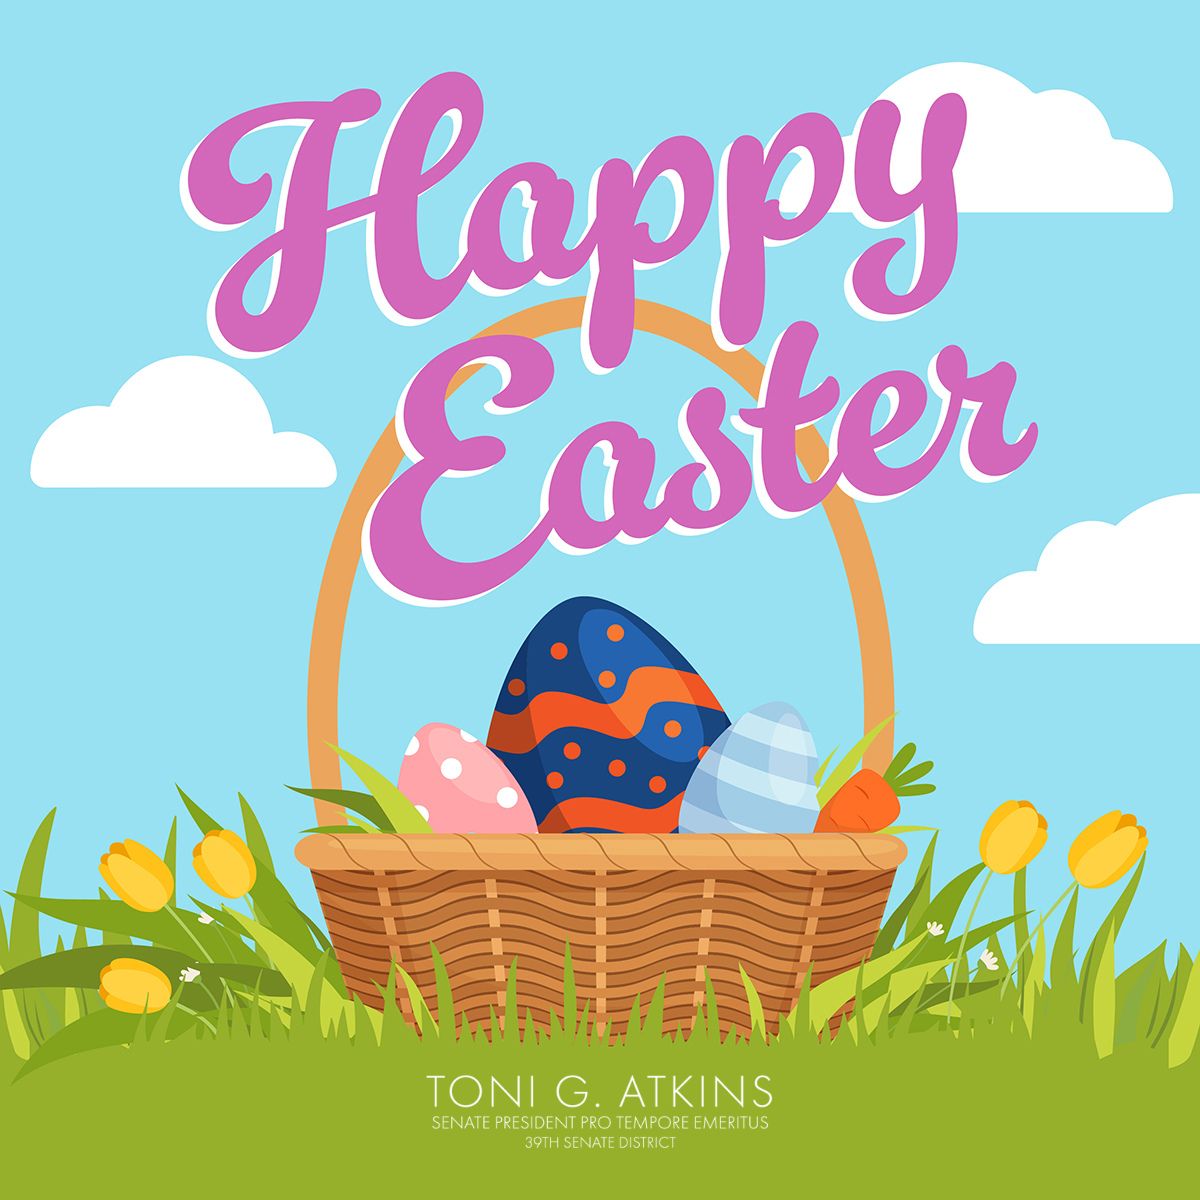 Happy #Easter to all who are celebrating! I wish you a day of joy with your family and loved ones. 🐰🐣🌻